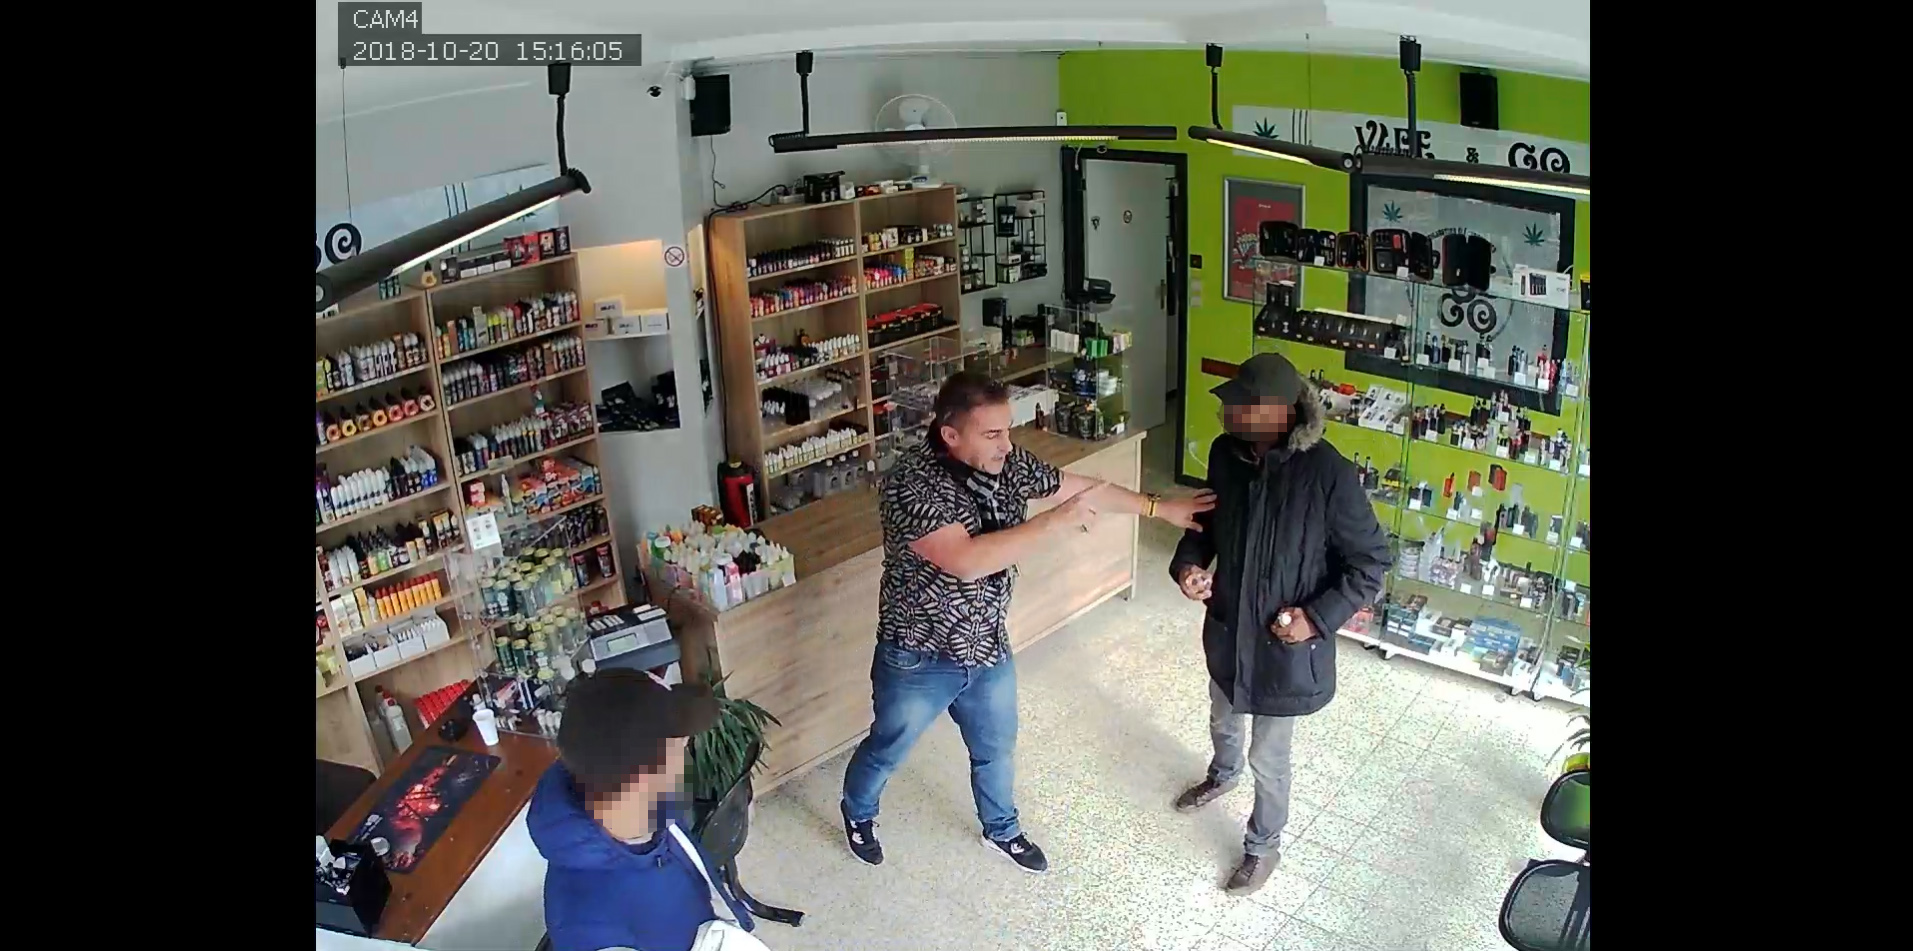 PHOTO: Men who police say attempted to rob an e-cigarette store in Montignies-sur-Sambre, Belgium, on Oct. 20, 2018, are convinced to leave the store by the owner who identified himself as Didier.